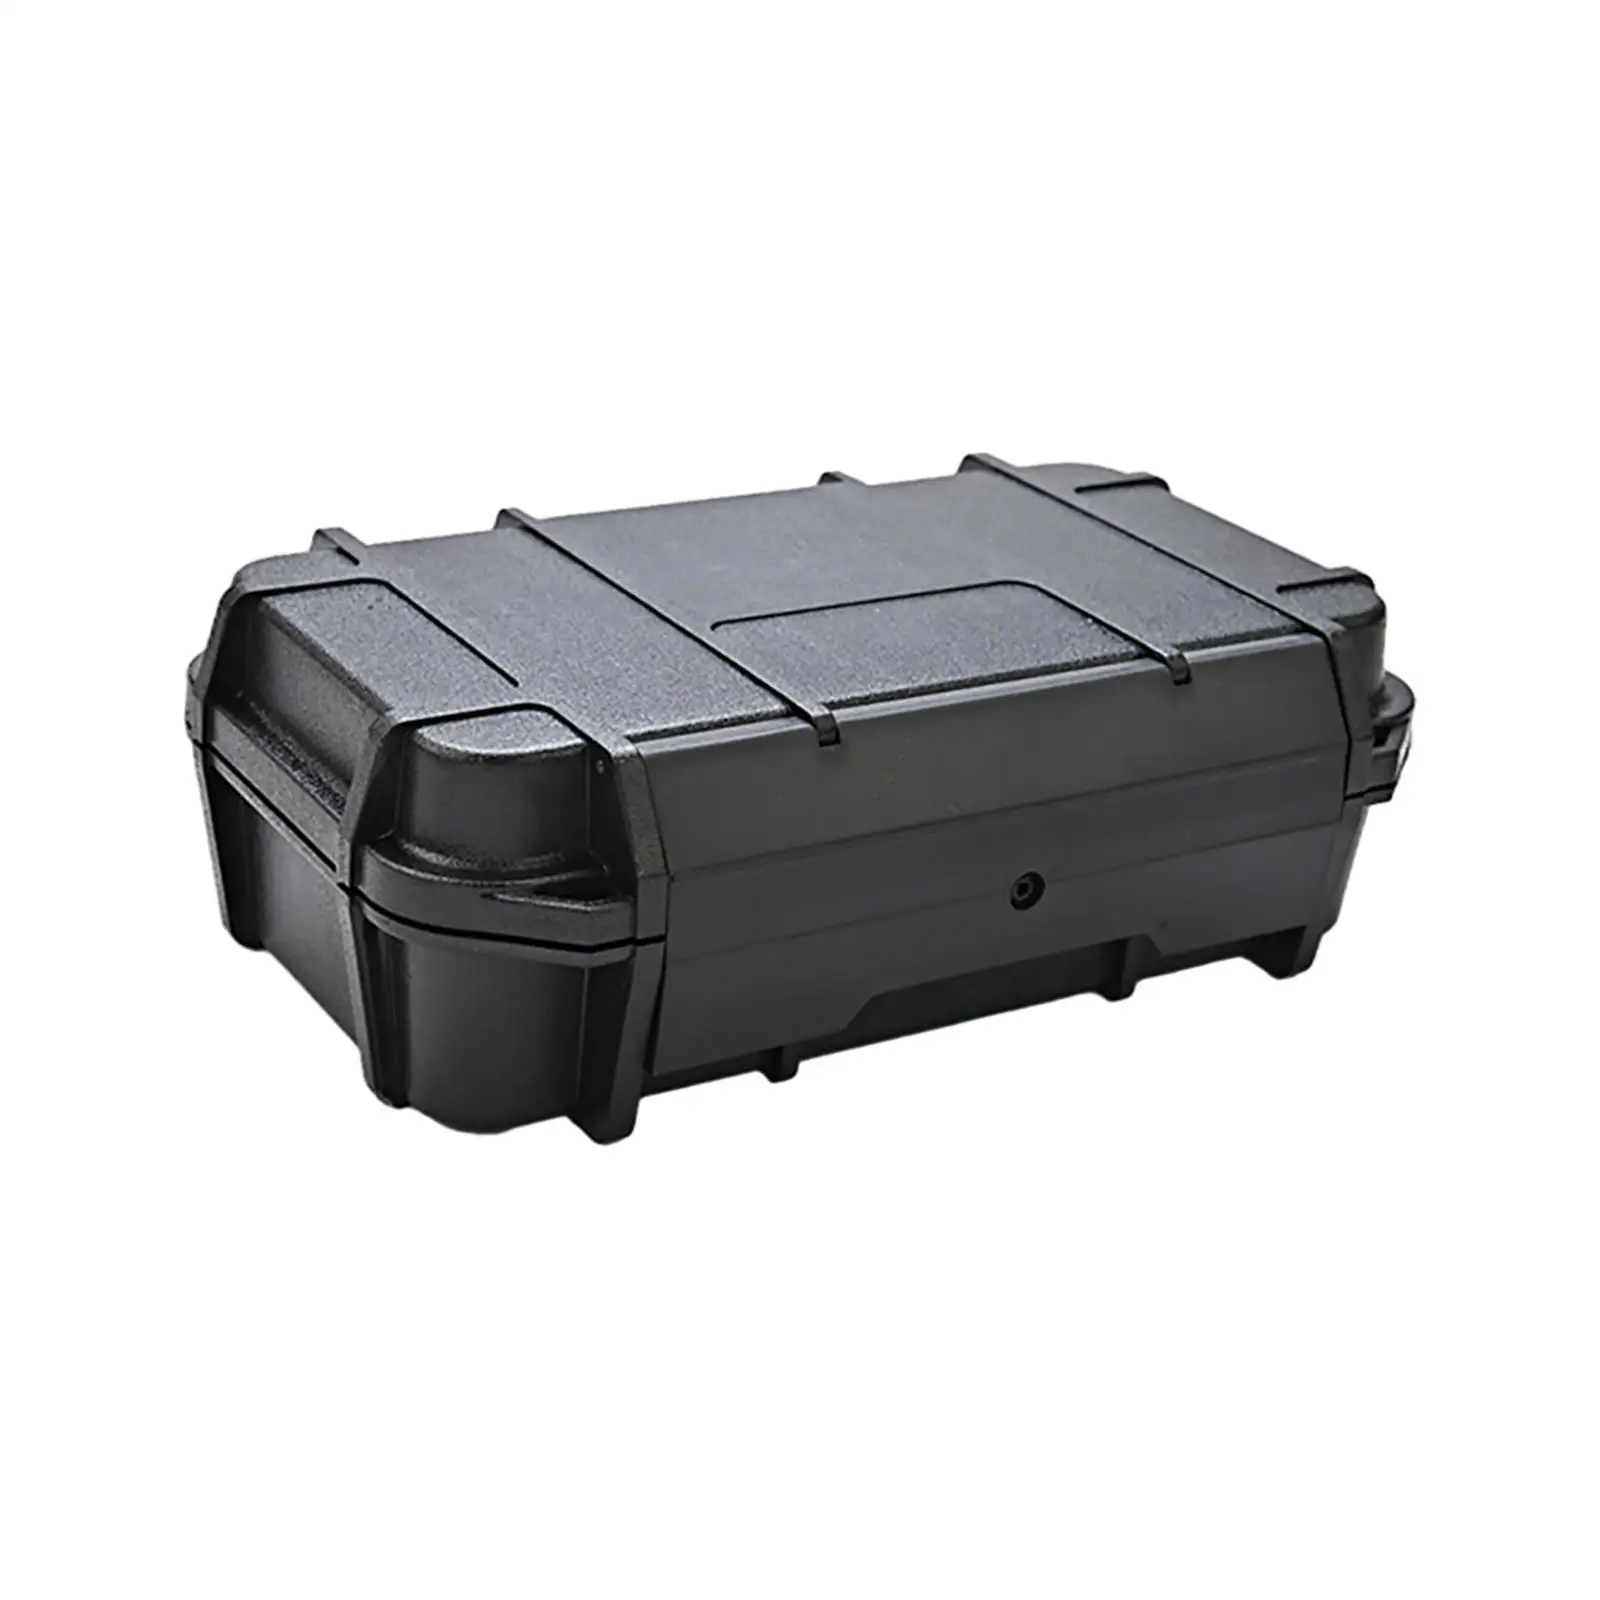 Tool Storage Box Multifunctional Storage Container for Hand Tools Repair Tool Cameras Small Electronics Equipment Accessories